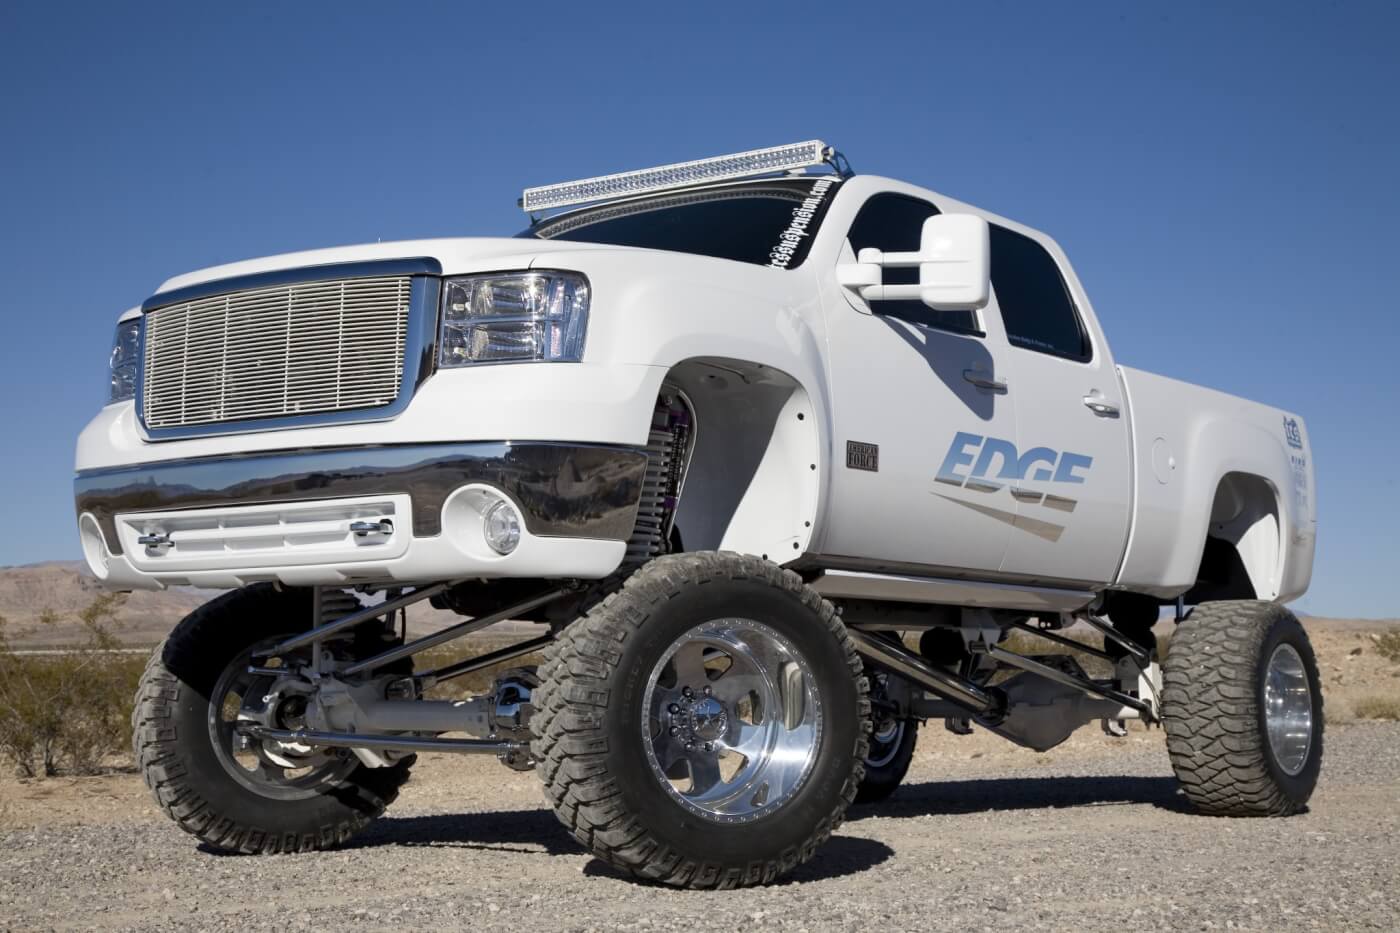 The 2008 Sierra 4x4 truck gets its lift from a 7-inch TCS Suspension kit. The TCS kit is said to be 100-percent bolt-on, no welding or cutting required. Notice the T-Rex grille and the Rigid LED light bar mounted using TCS light bar brackets.